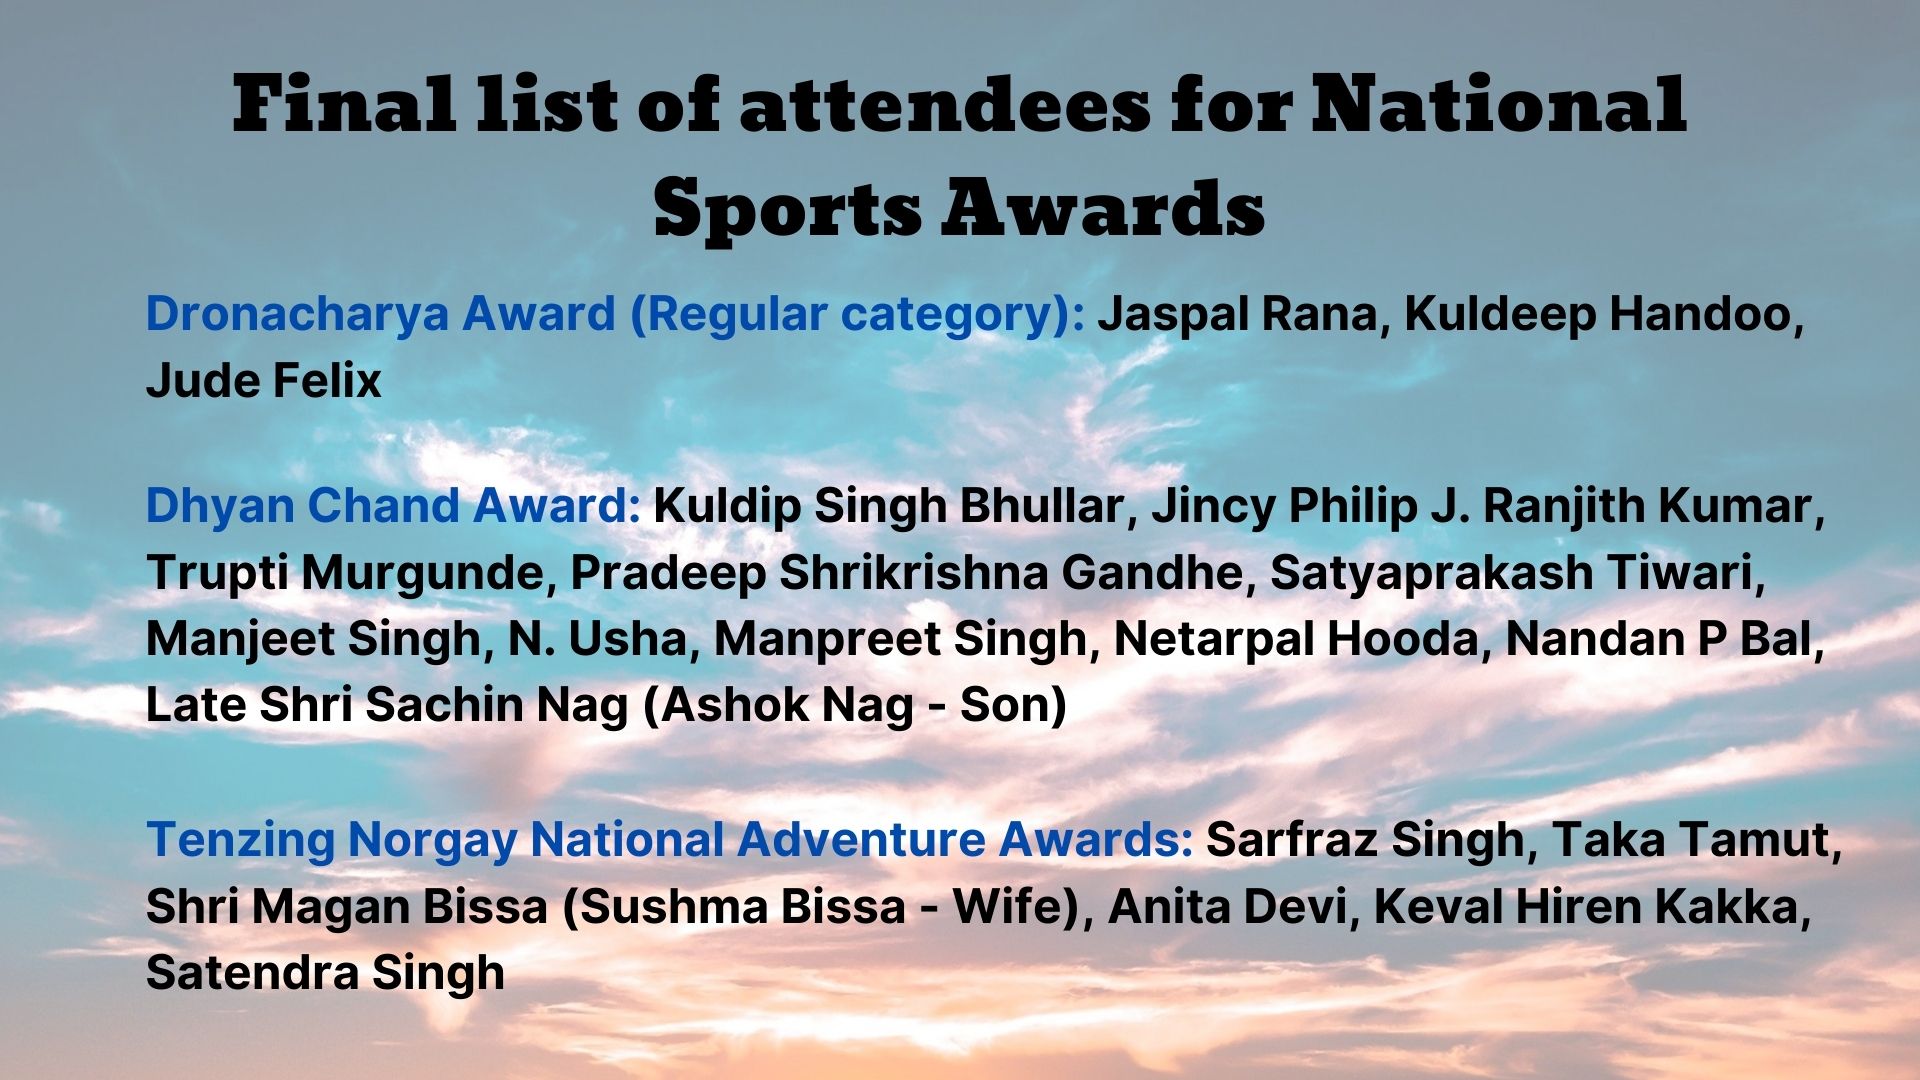 hike in prize money for National Sports Awards